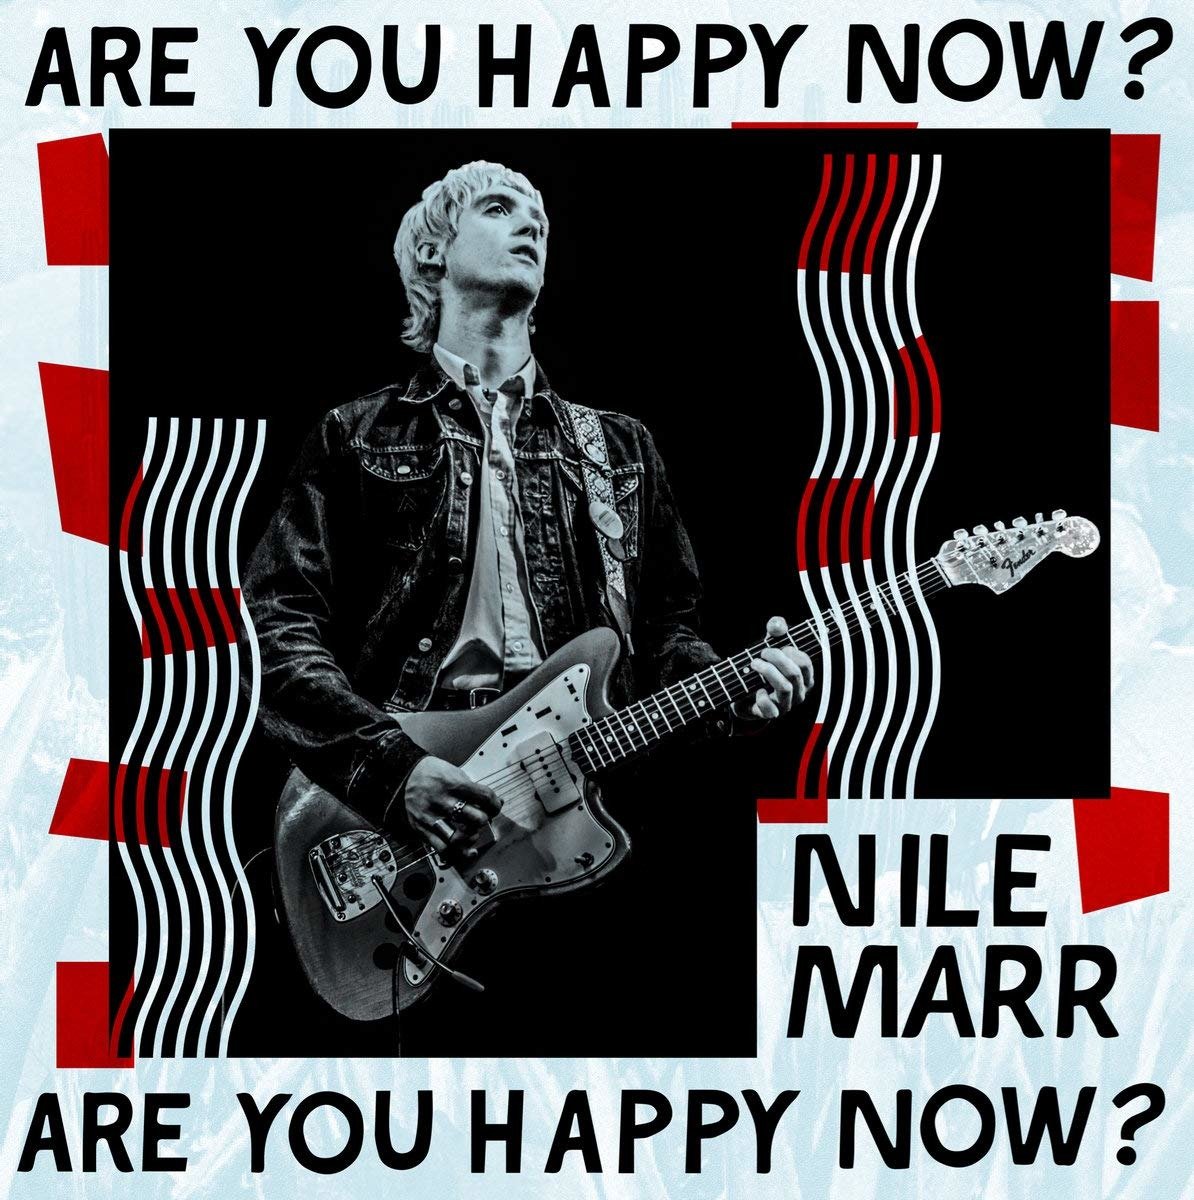 CD Shop - MARR, NILE ARE YOU HAPPY NOW?